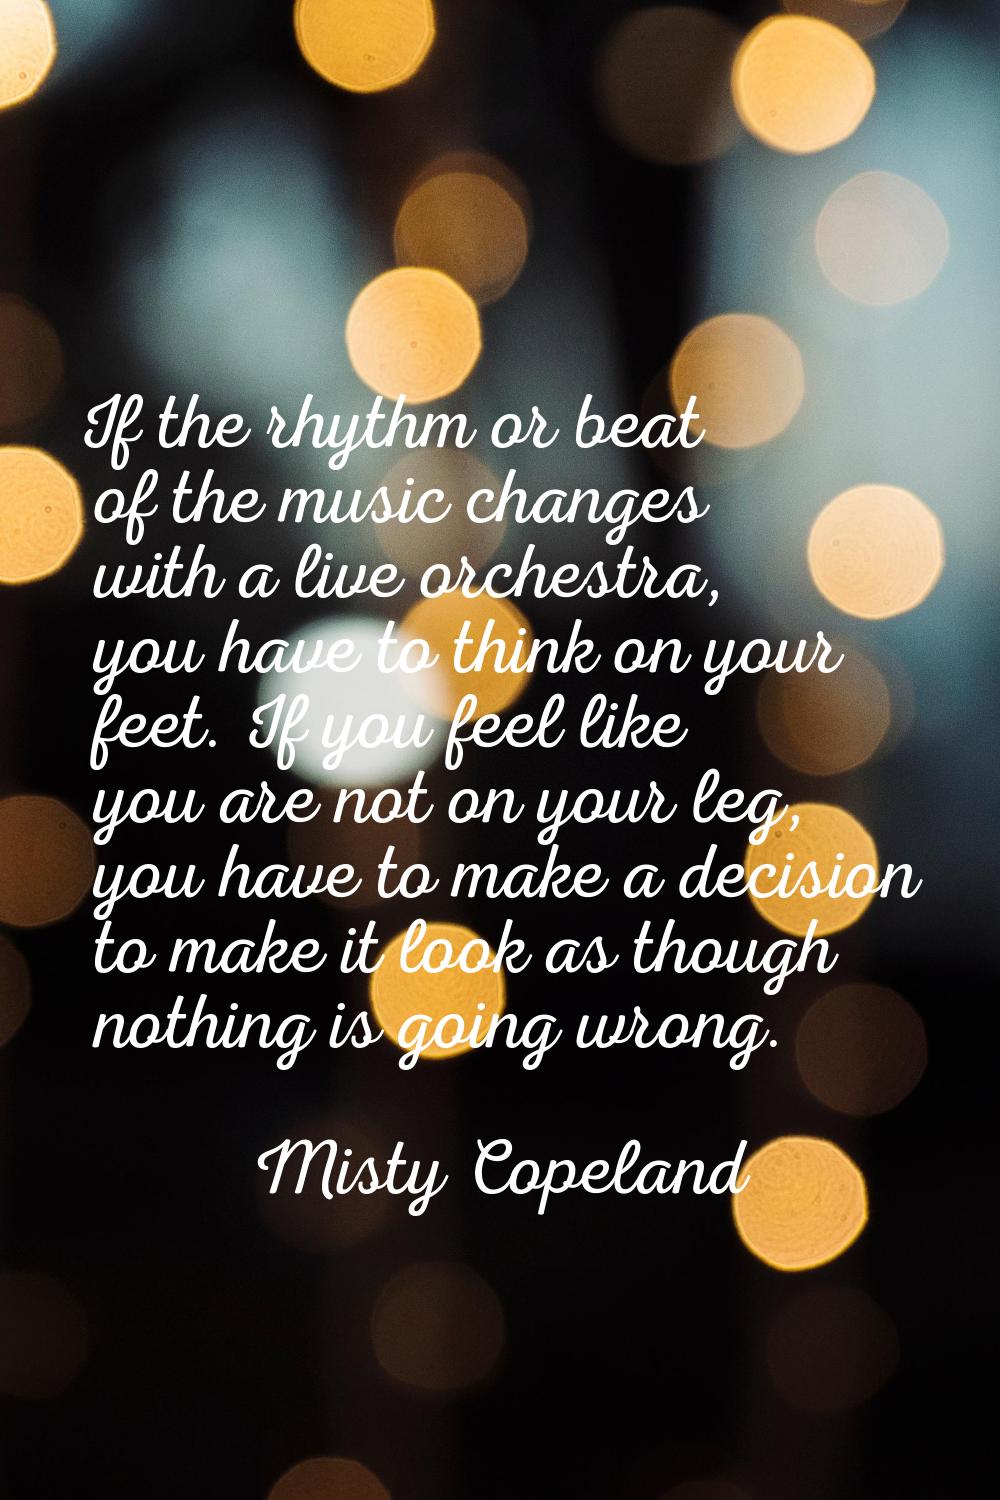 If the rhythm or beat of the music changes with a live orchestra, you have to think on your feet. I